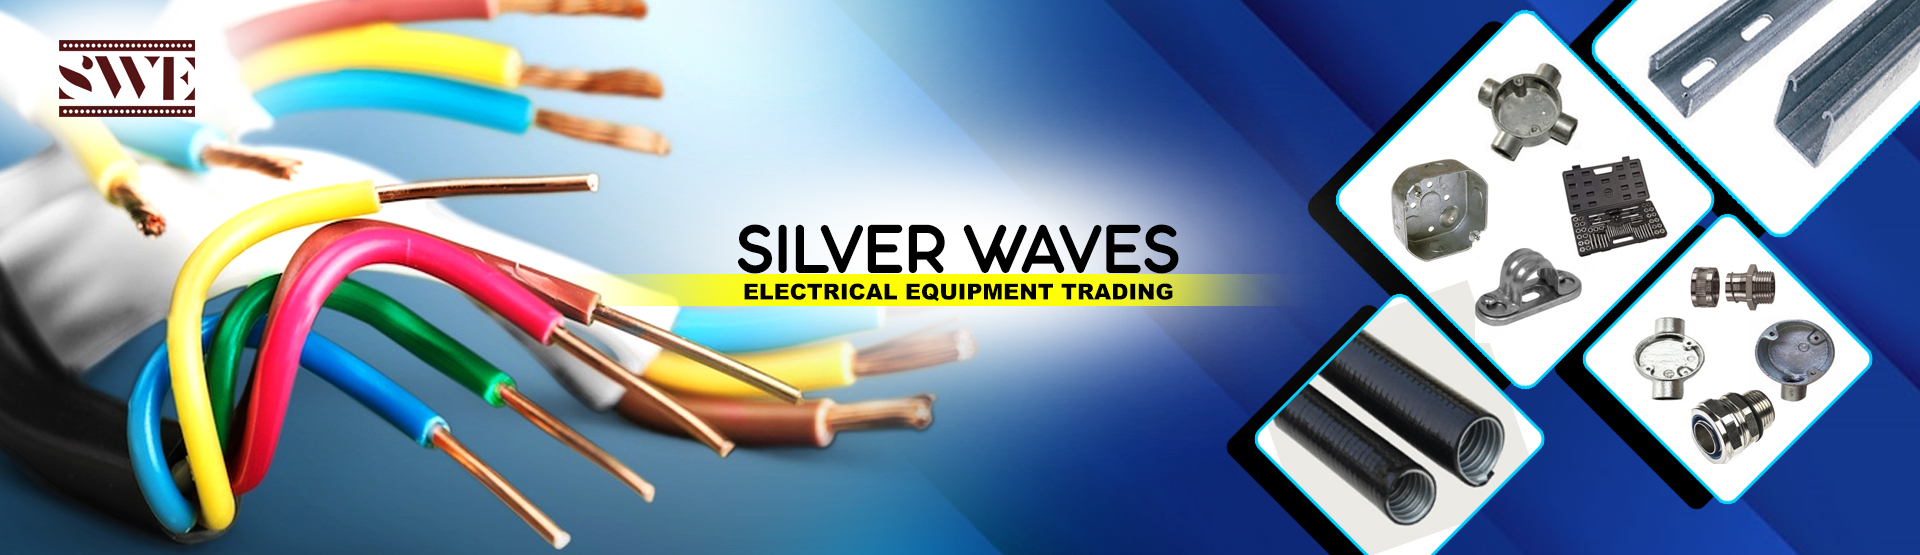 SILVER WAVES ELECTRICAL EQUIPMENT TRADING